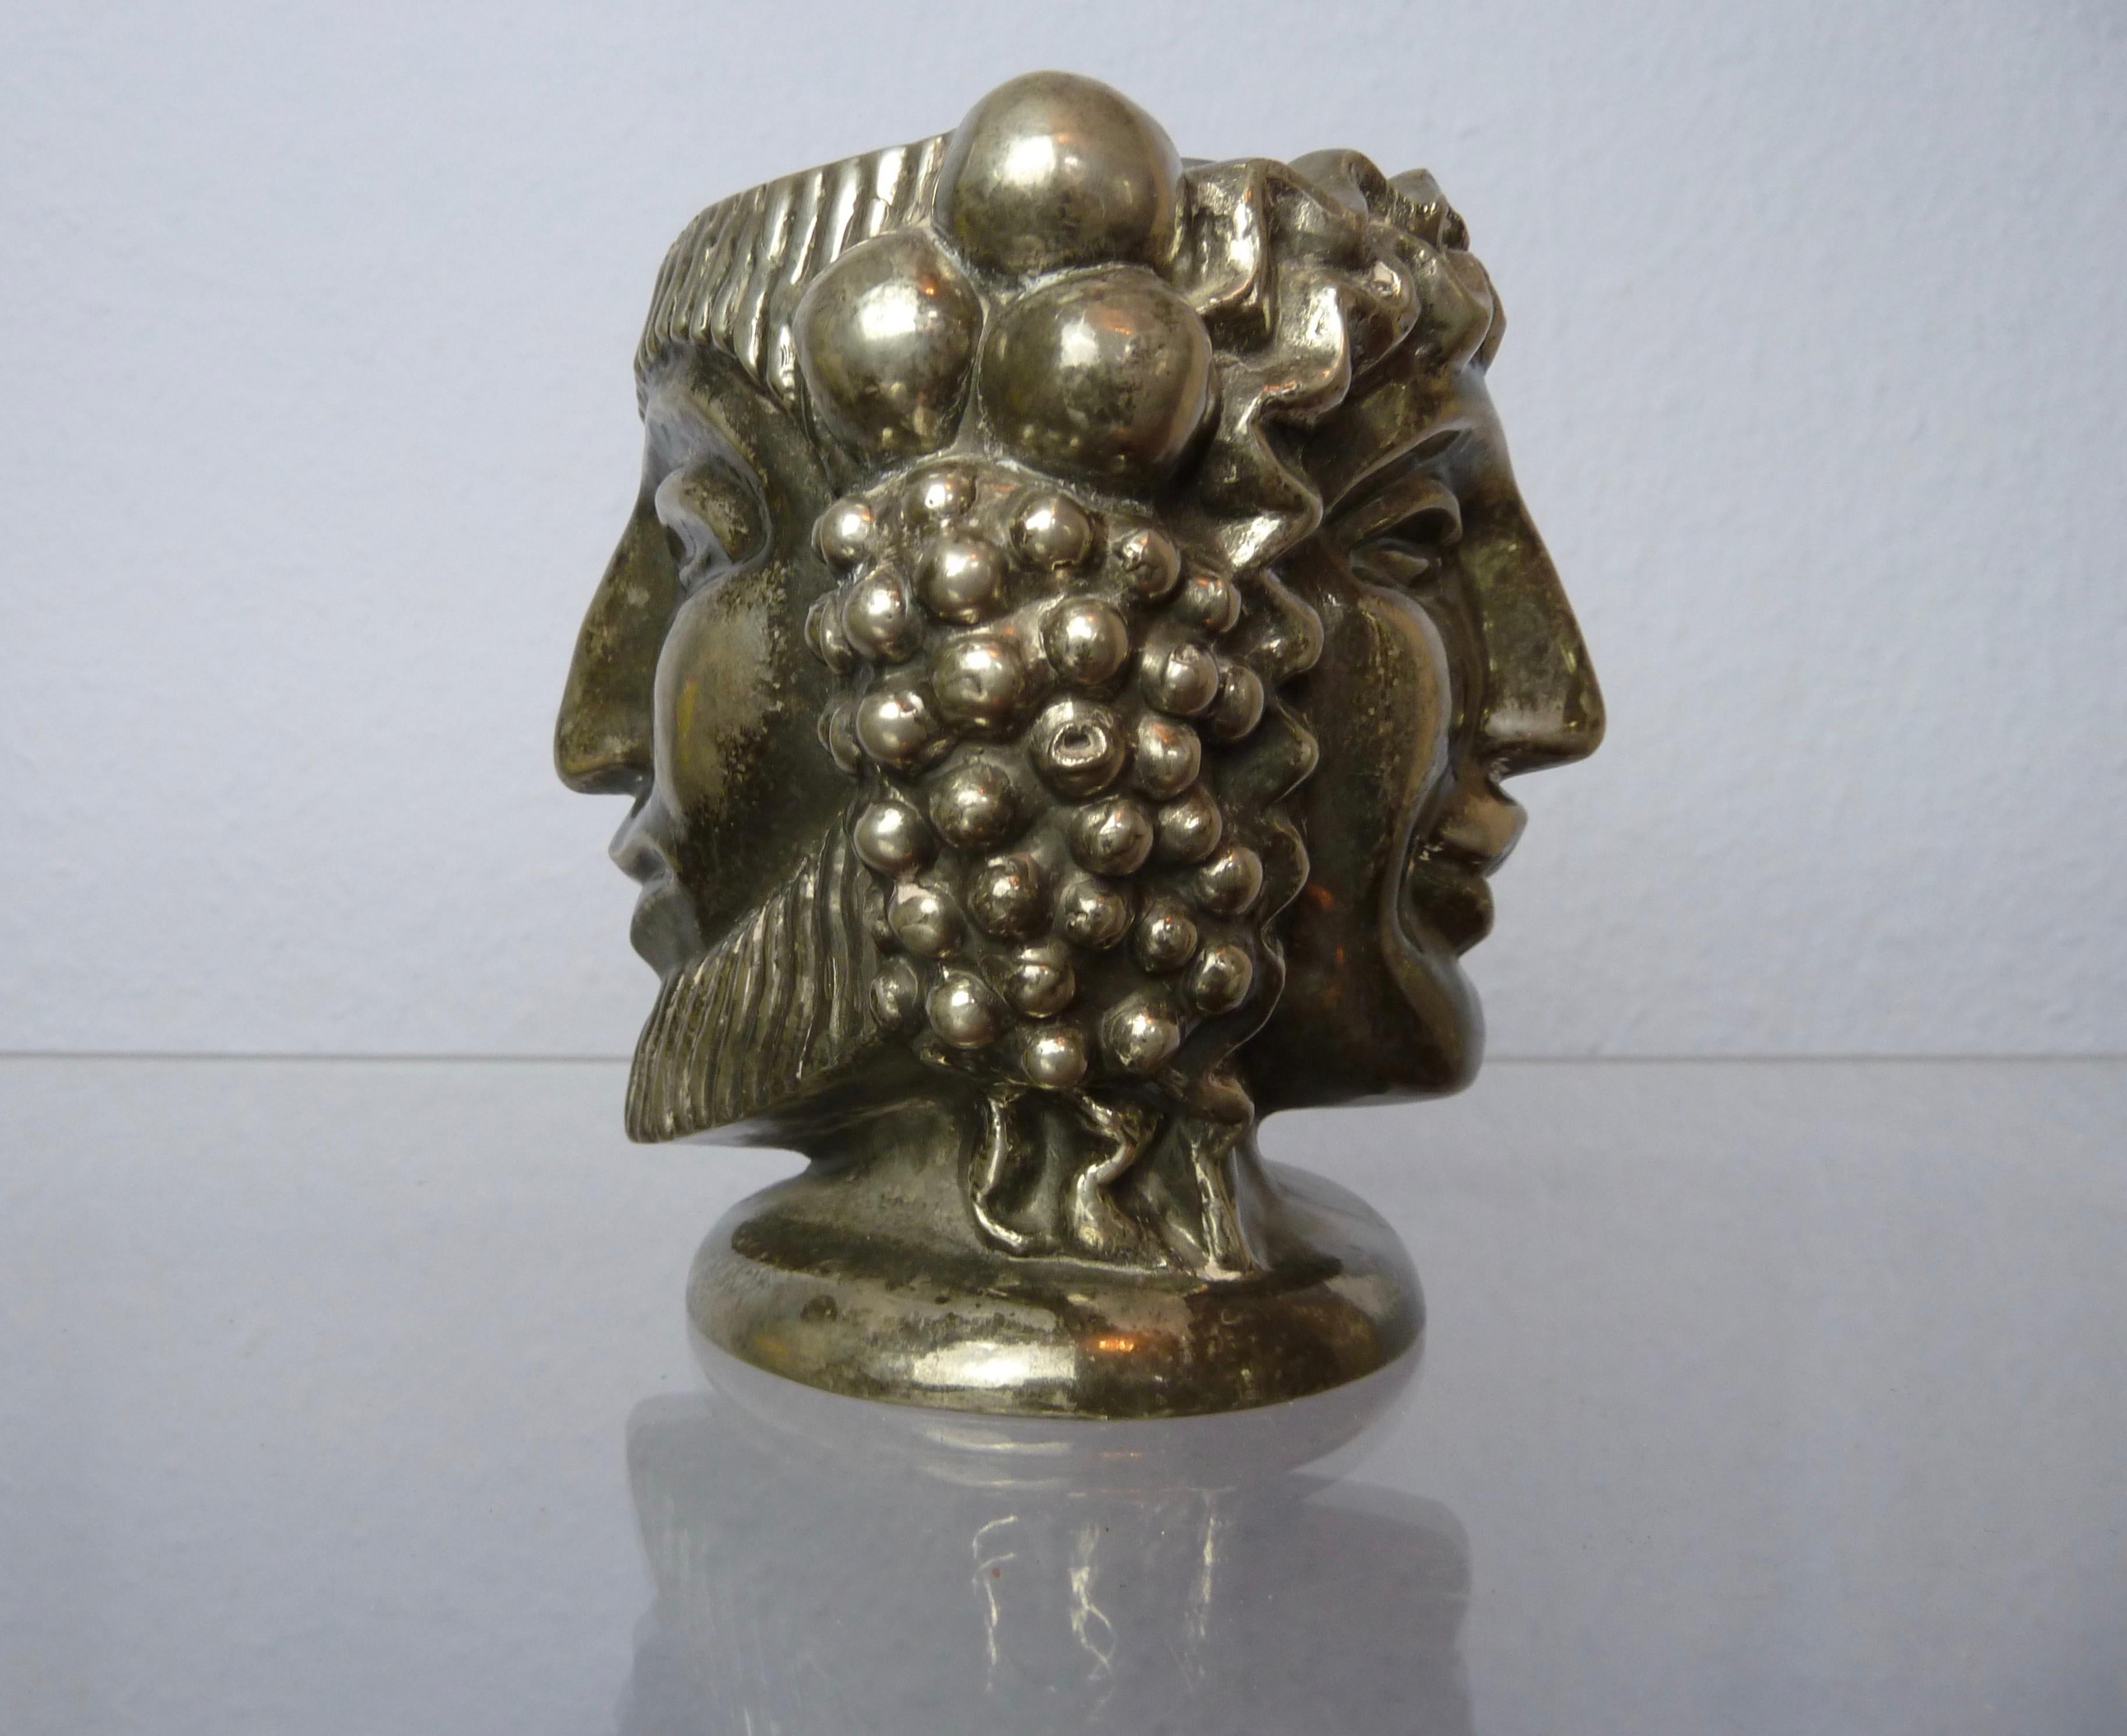 A Svenskt Tenn pewter vase Janus /Janushuvud by Anna Petrus, Sweden.

Designed in 1927 by Anna Petrus, manufactured in 1984.
This version is from a better quality and better detailed than most of the later examples.